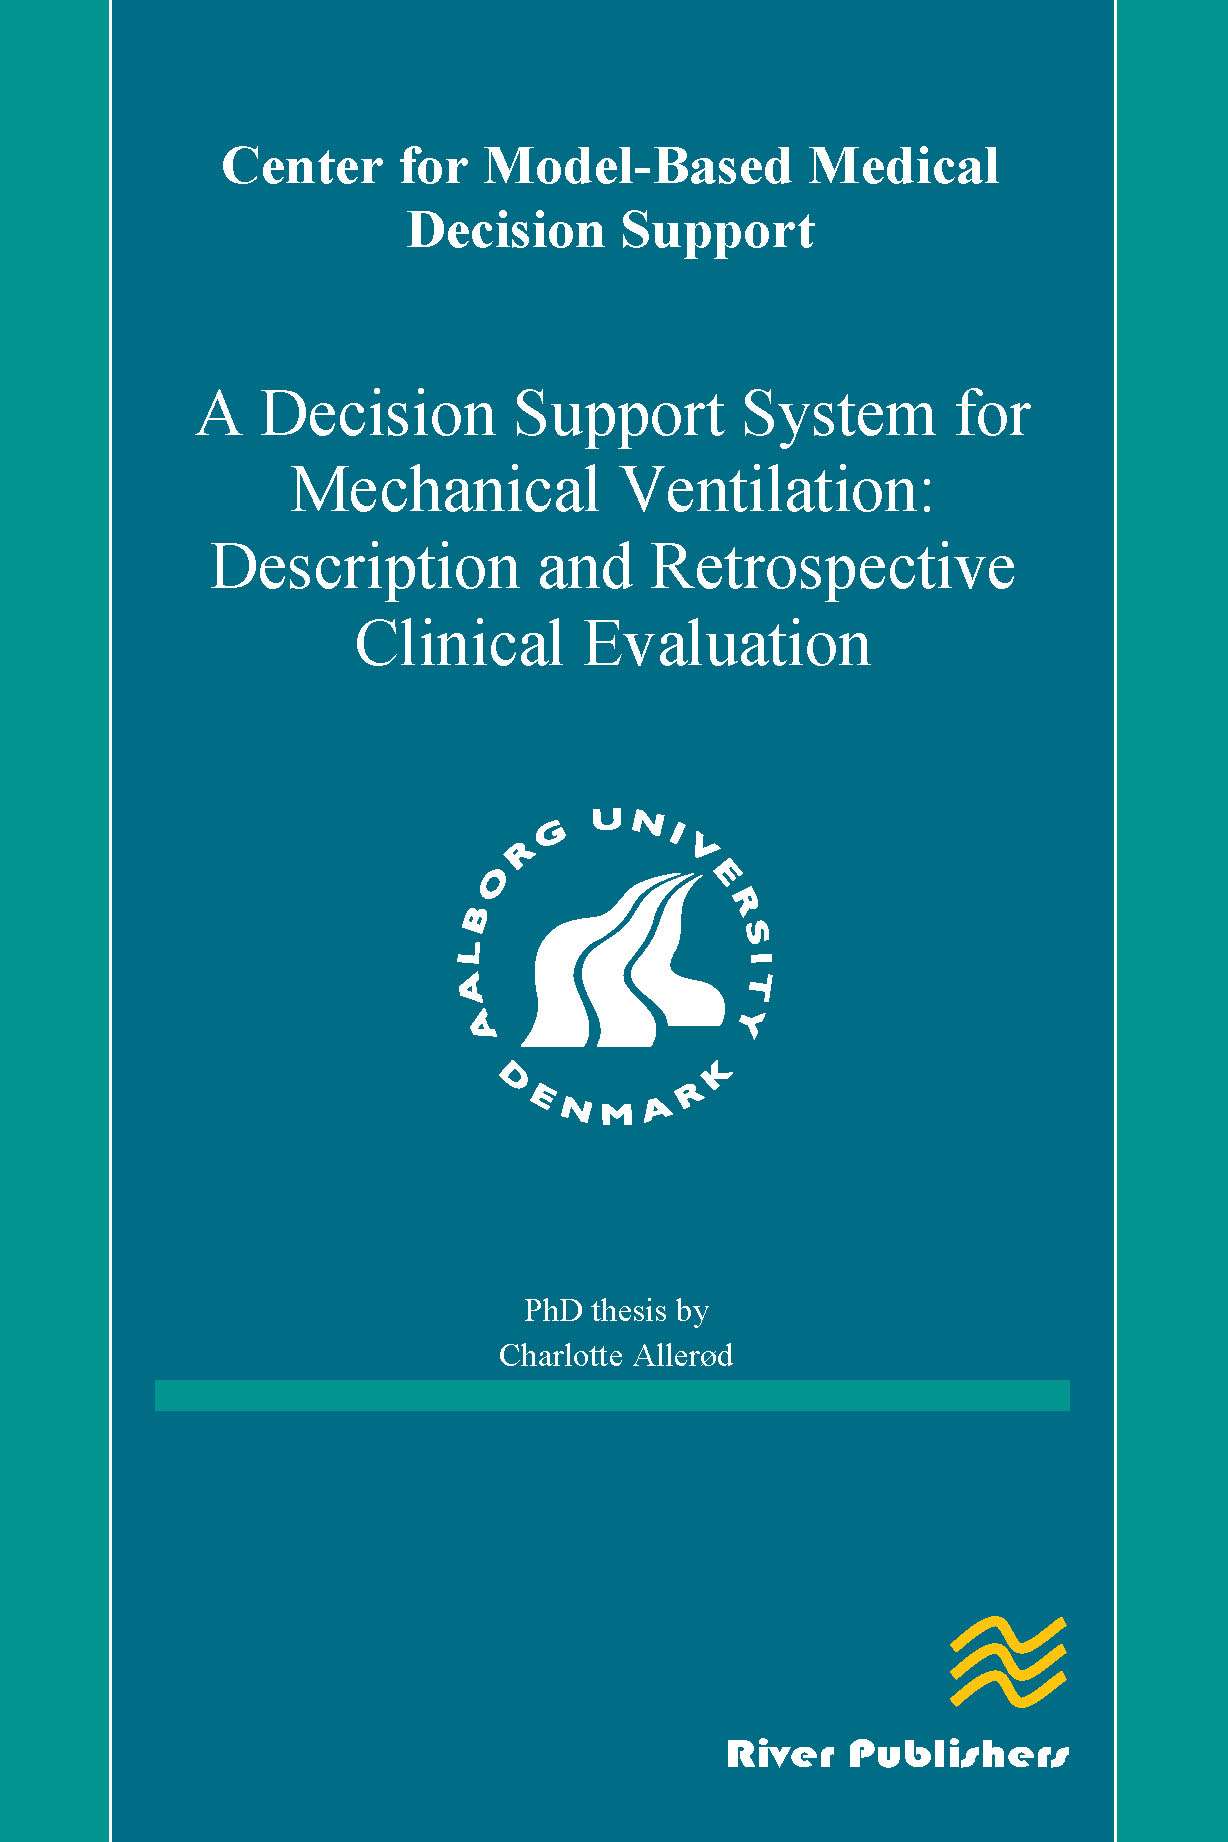 A Decision Support System for Mechanical Ventilation